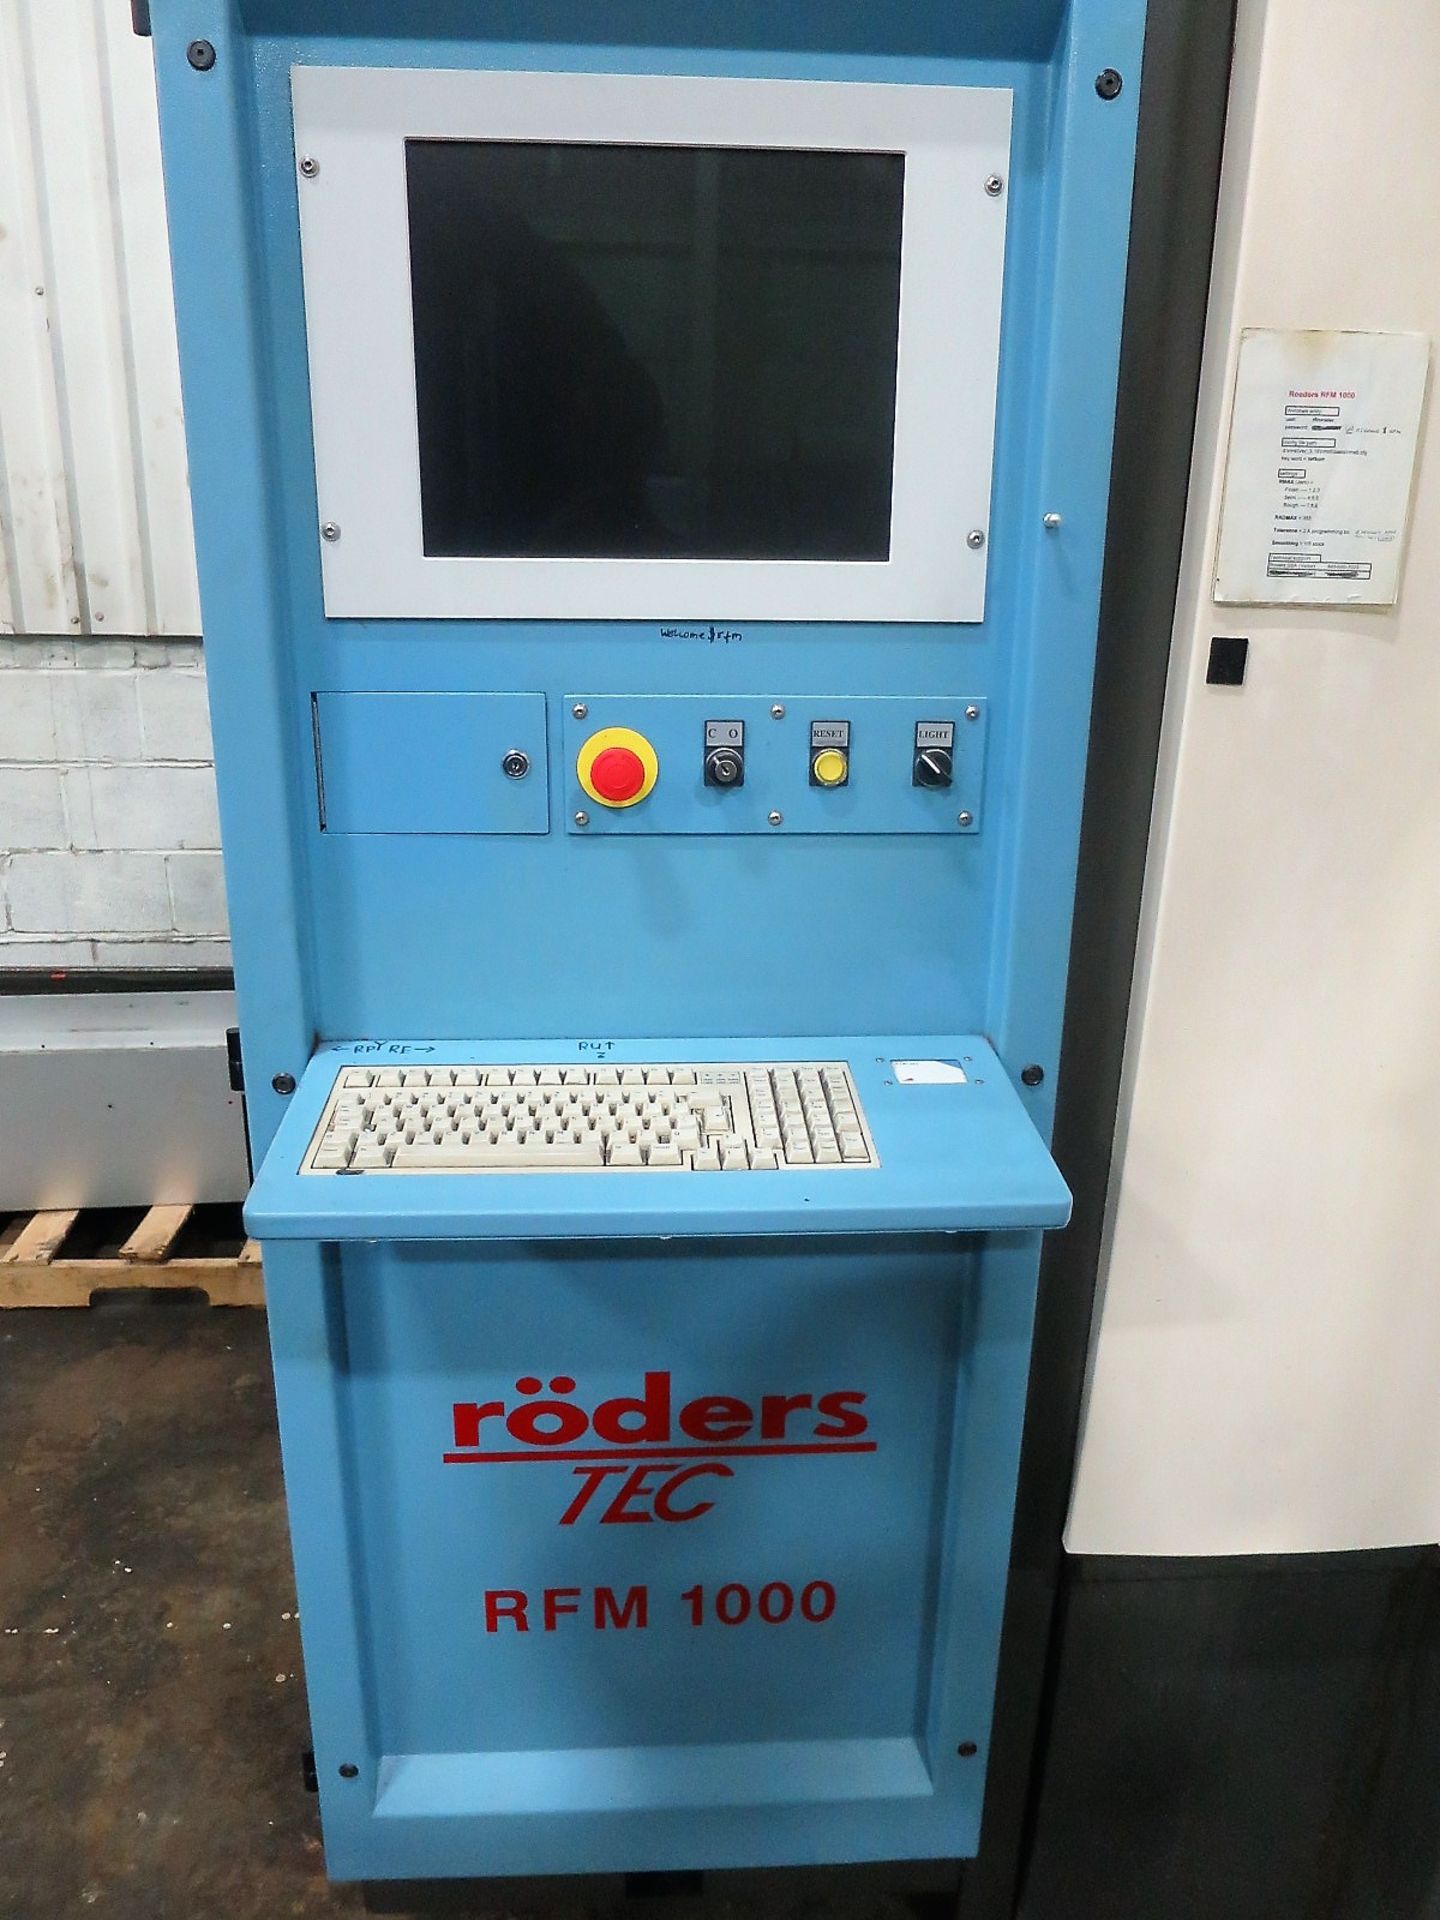 RODERS RFM 1000 HIGH SPEED 3-AXIS CNC VERTICAL MACHINING CENTER, S/N 10722-65, NEW 2004 - Image 8 of 16